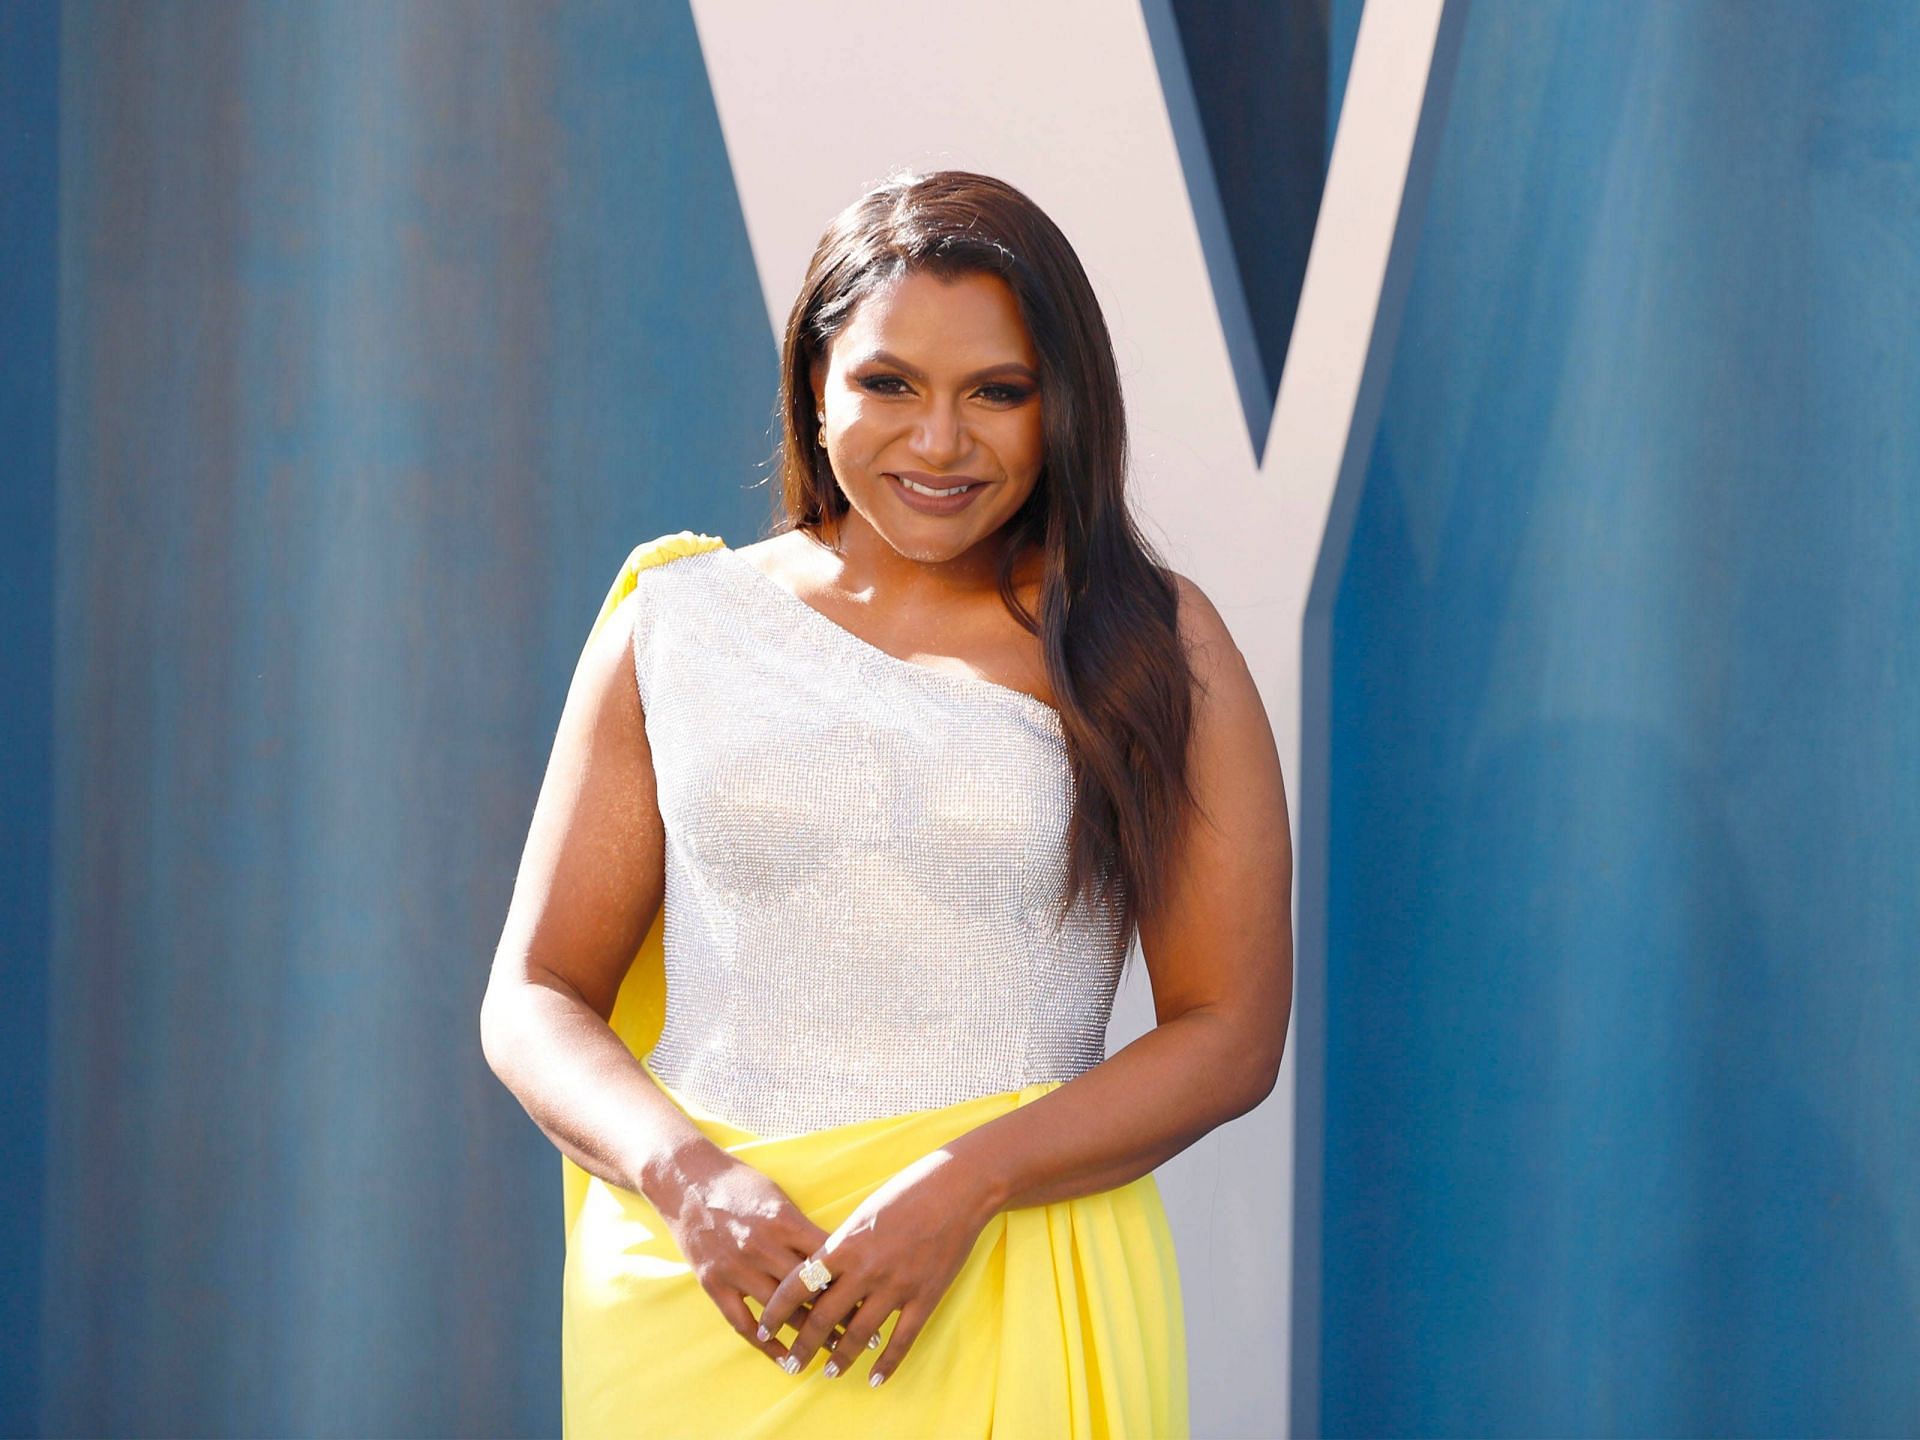 How did Mindy Kaling lose weight? (Image via Wallpaper.com)